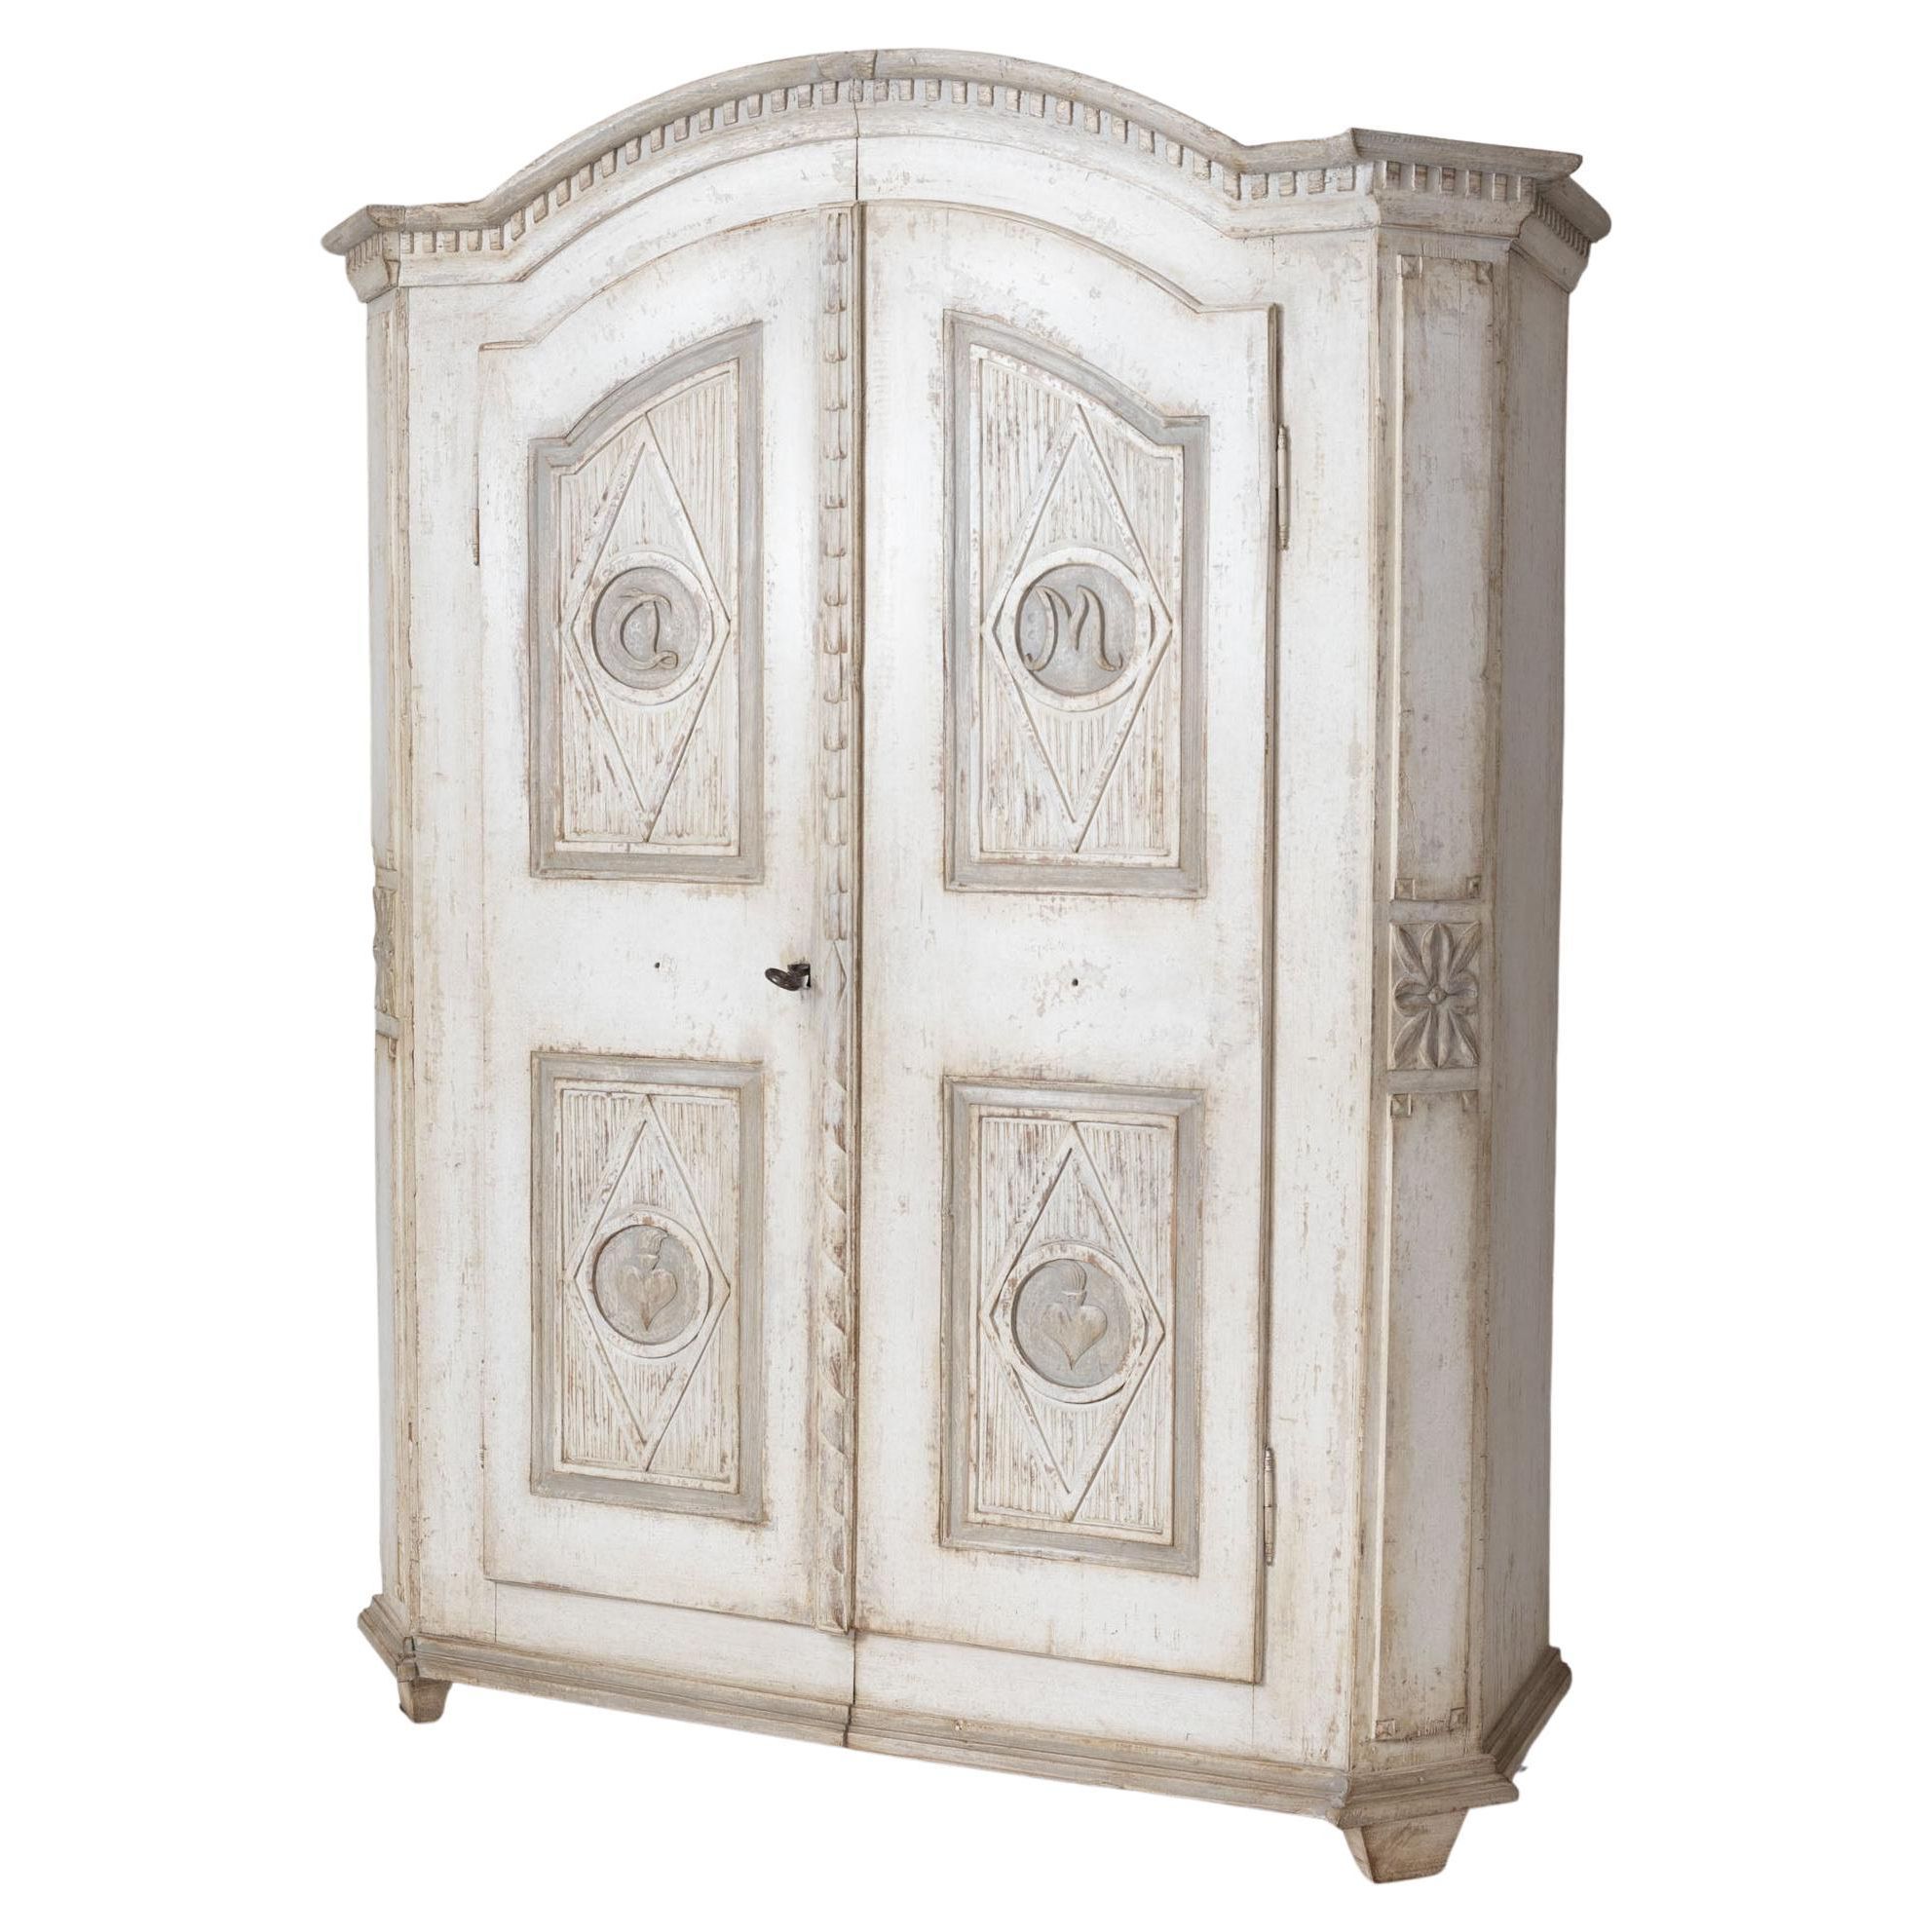 Two Door Armoire Or Wardrobe For Clothes, White Paint With Patina, 19th  Century For Sale At 1stdibs Inside White French Armoire Wardrobes (Gallery 18 of 20)